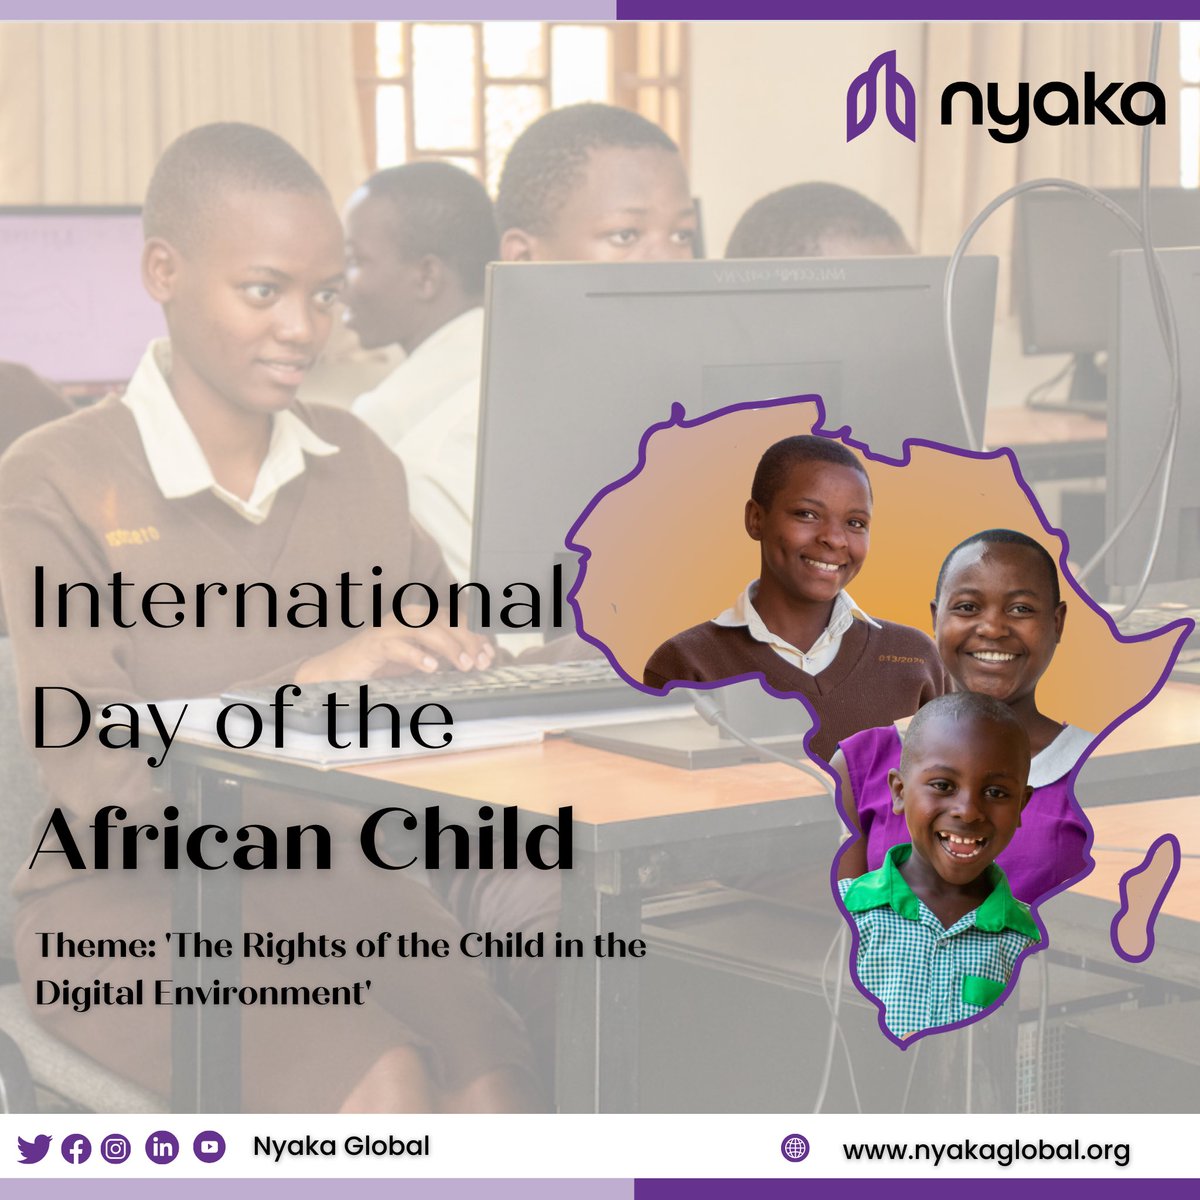 Nyaka bridges the digital divide through IT integration in its education program, thus empowering learners to thrive in a technology-driven world.

#NyakaLearners #Education #DAC2023 #DAC23 #InternationalDayOfTheAfricanChild